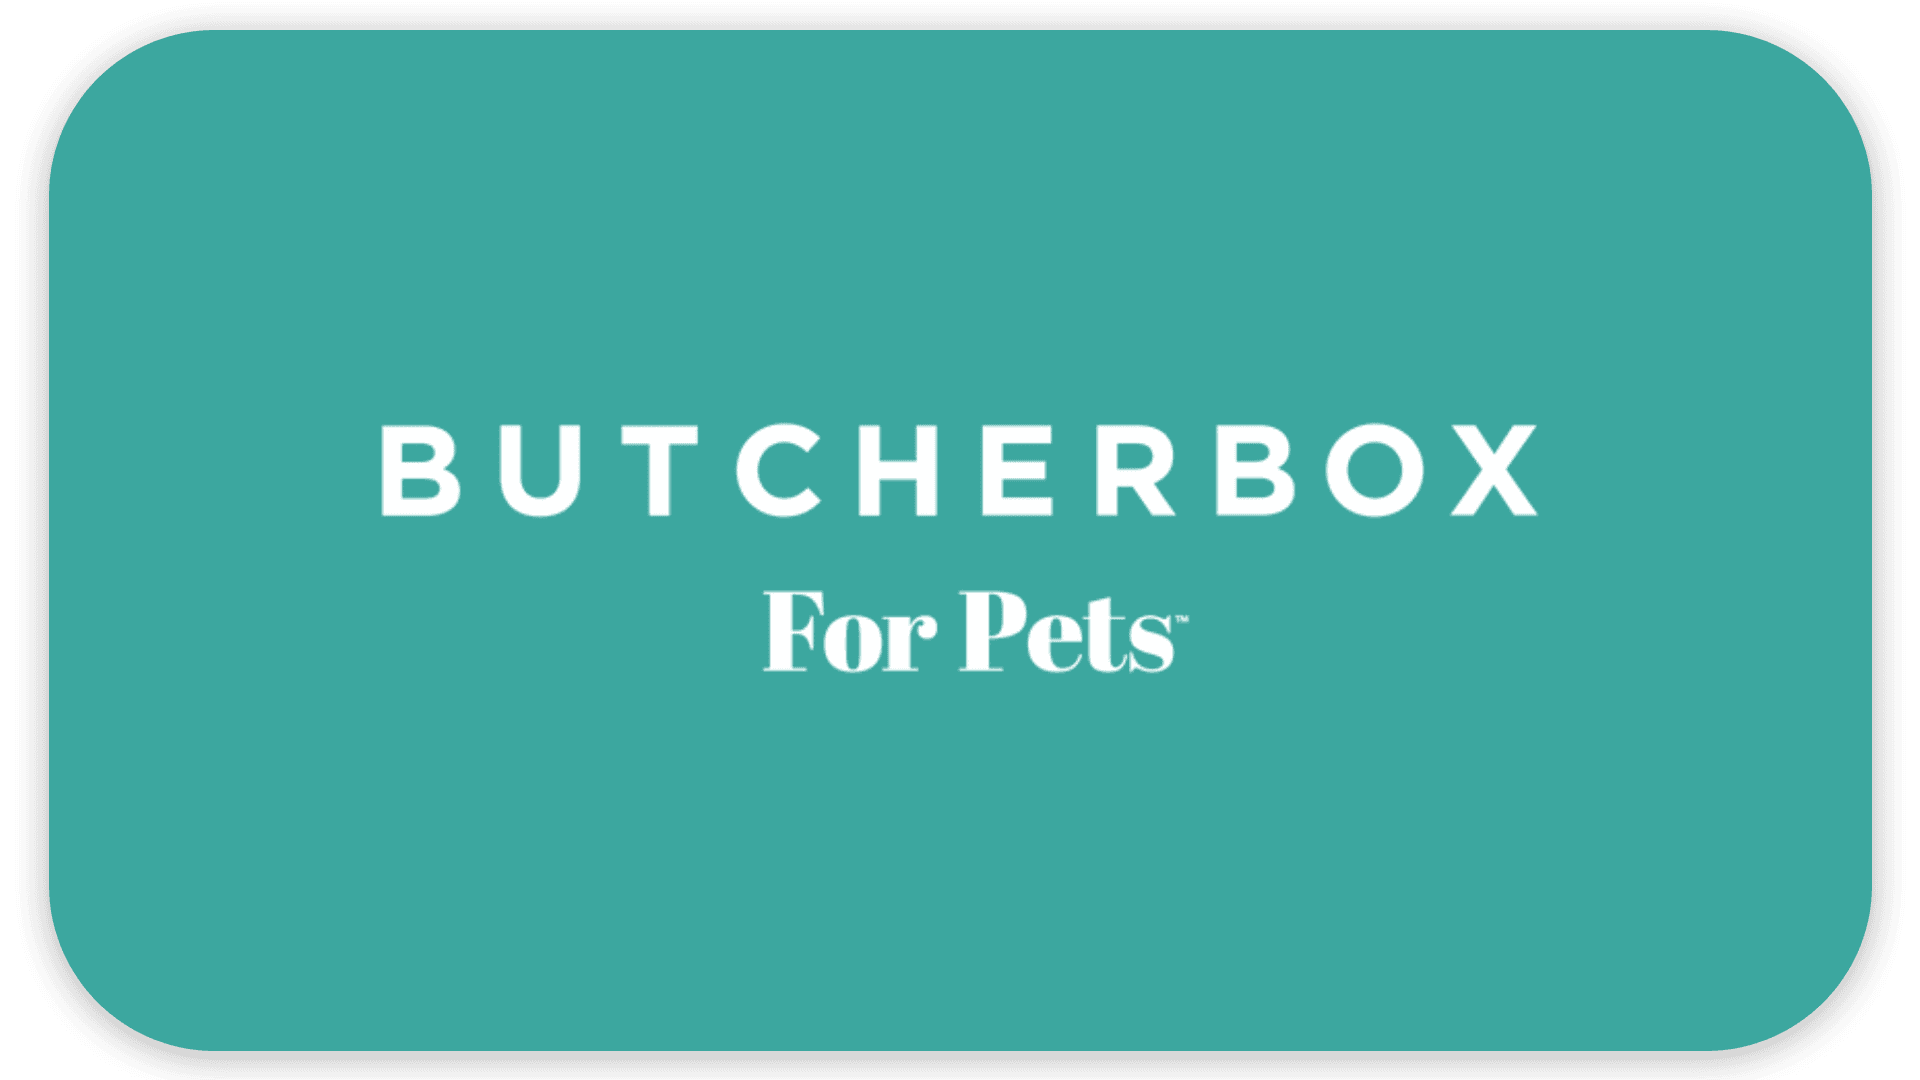 A turquoise background displays the text "BUTCHERBOX For Pets" in white.